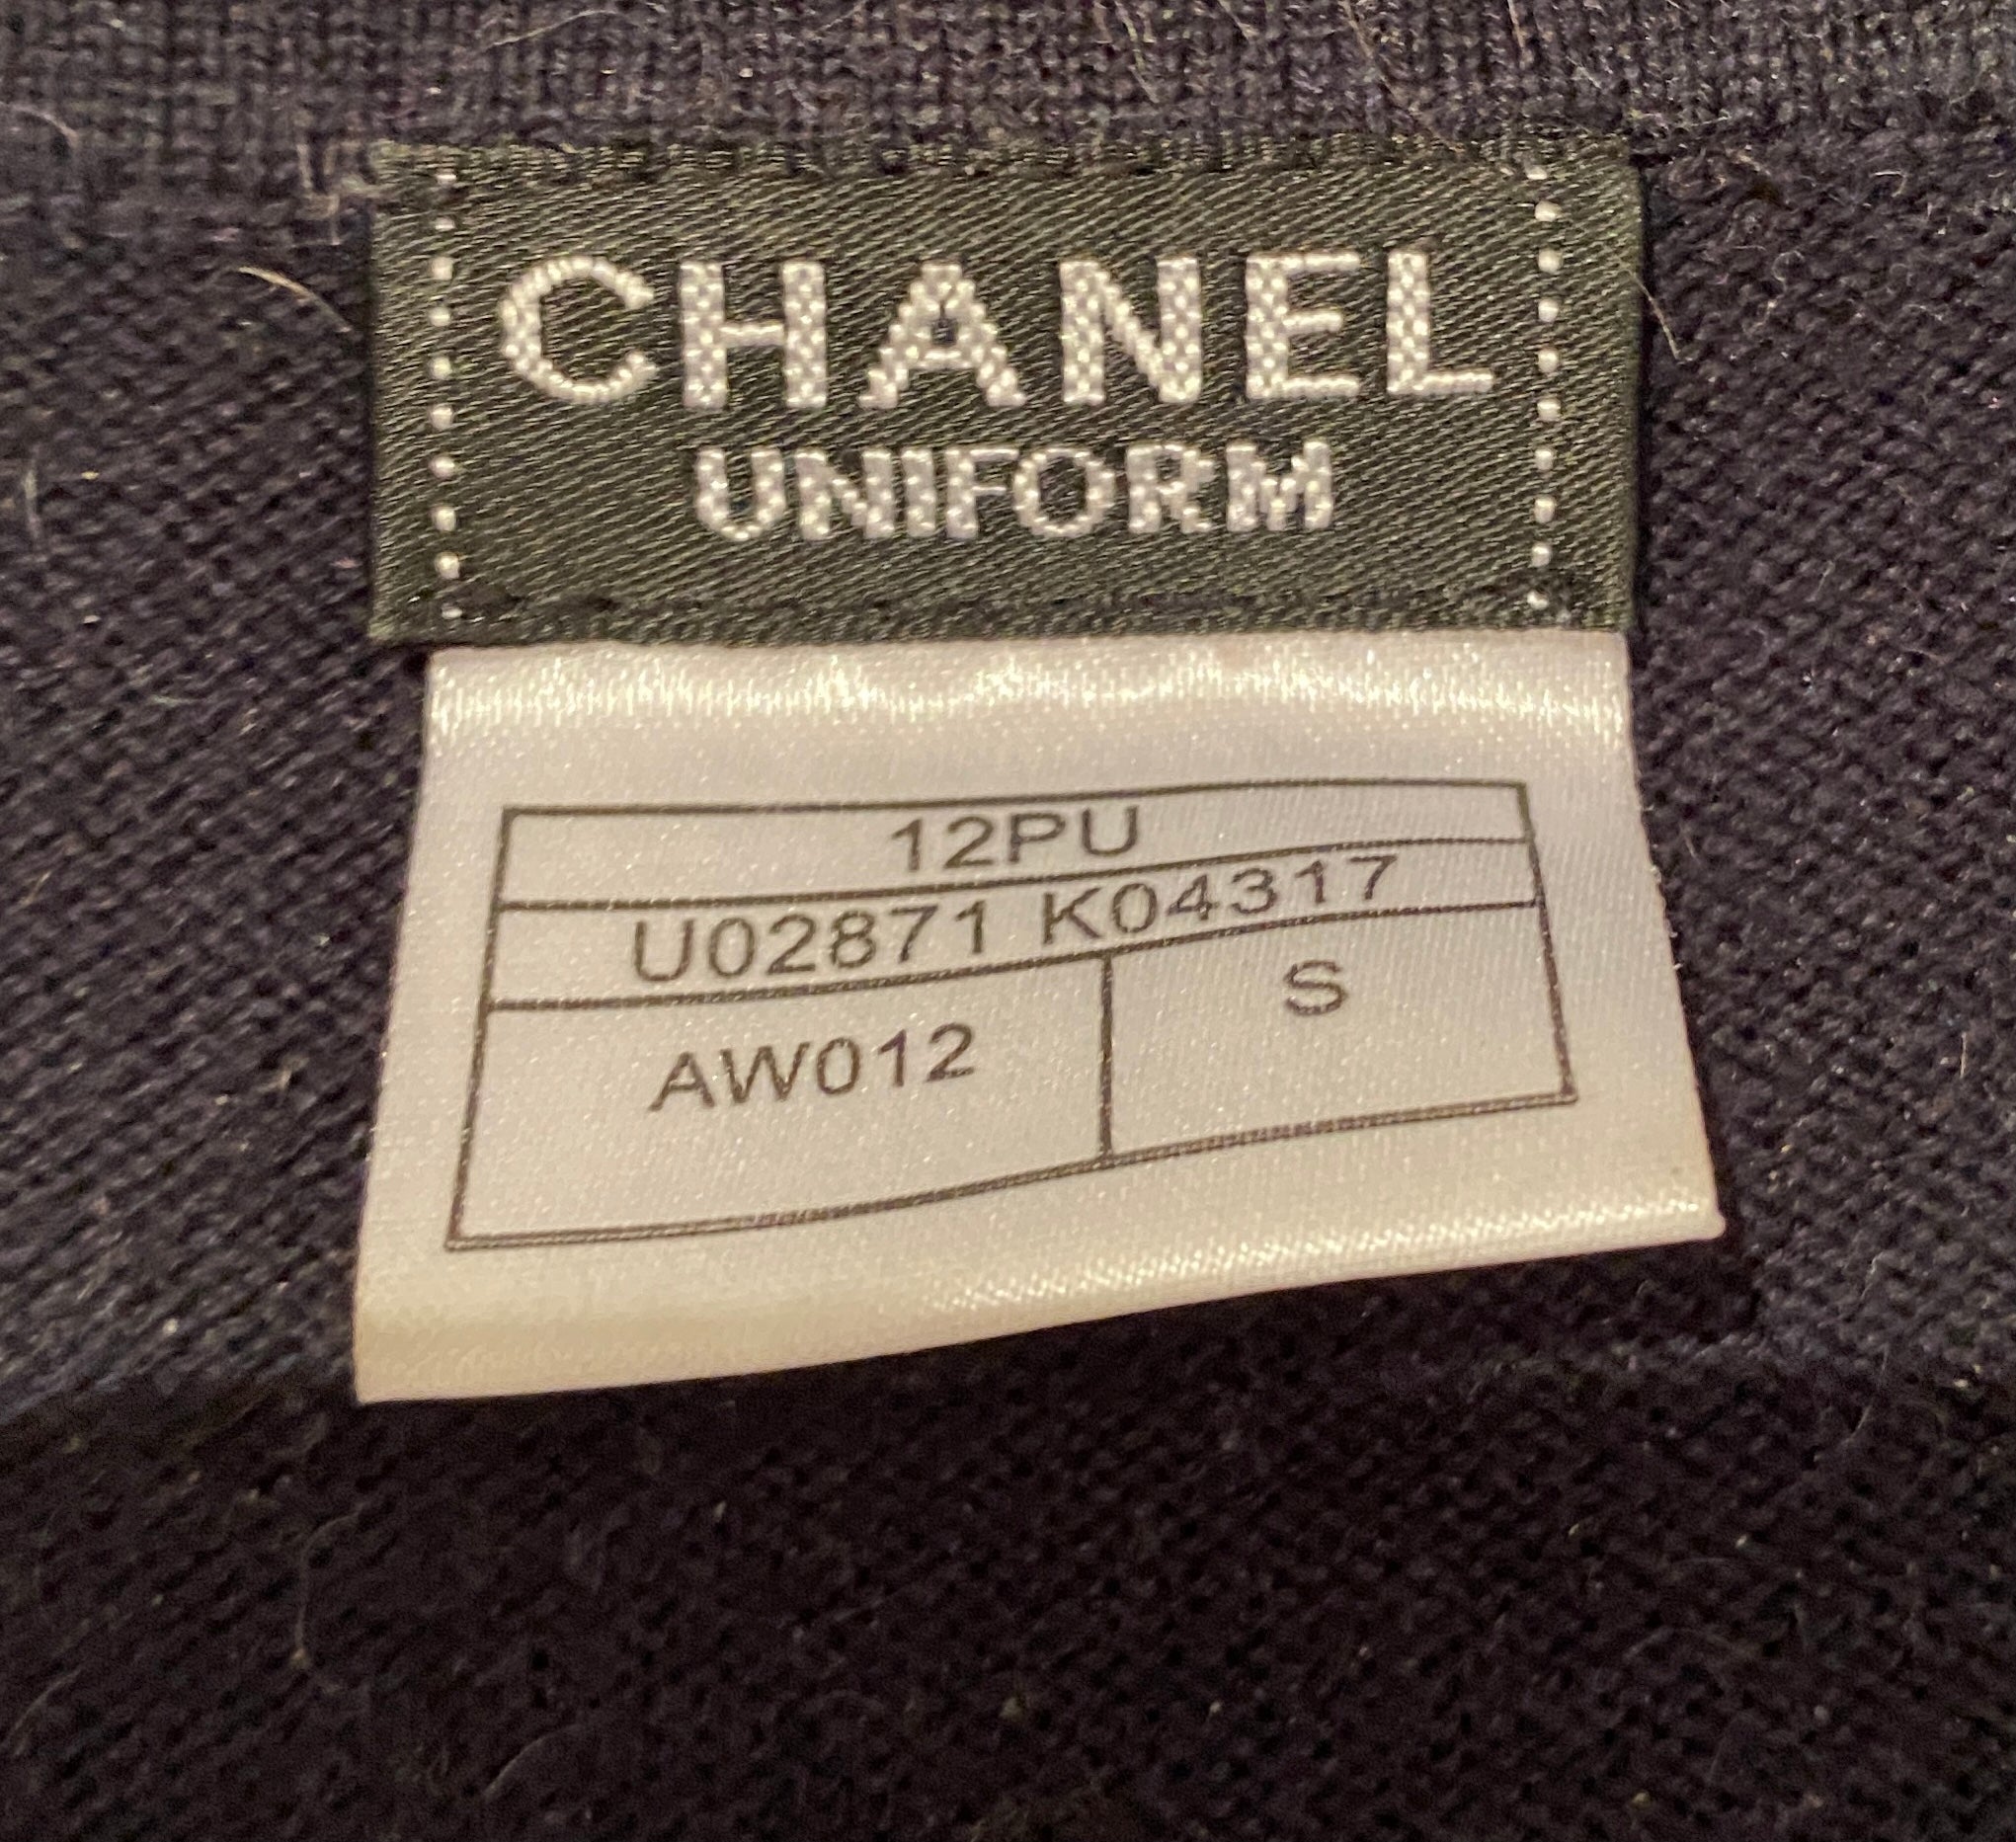 chanel dark blue cardigan with camelia buttons